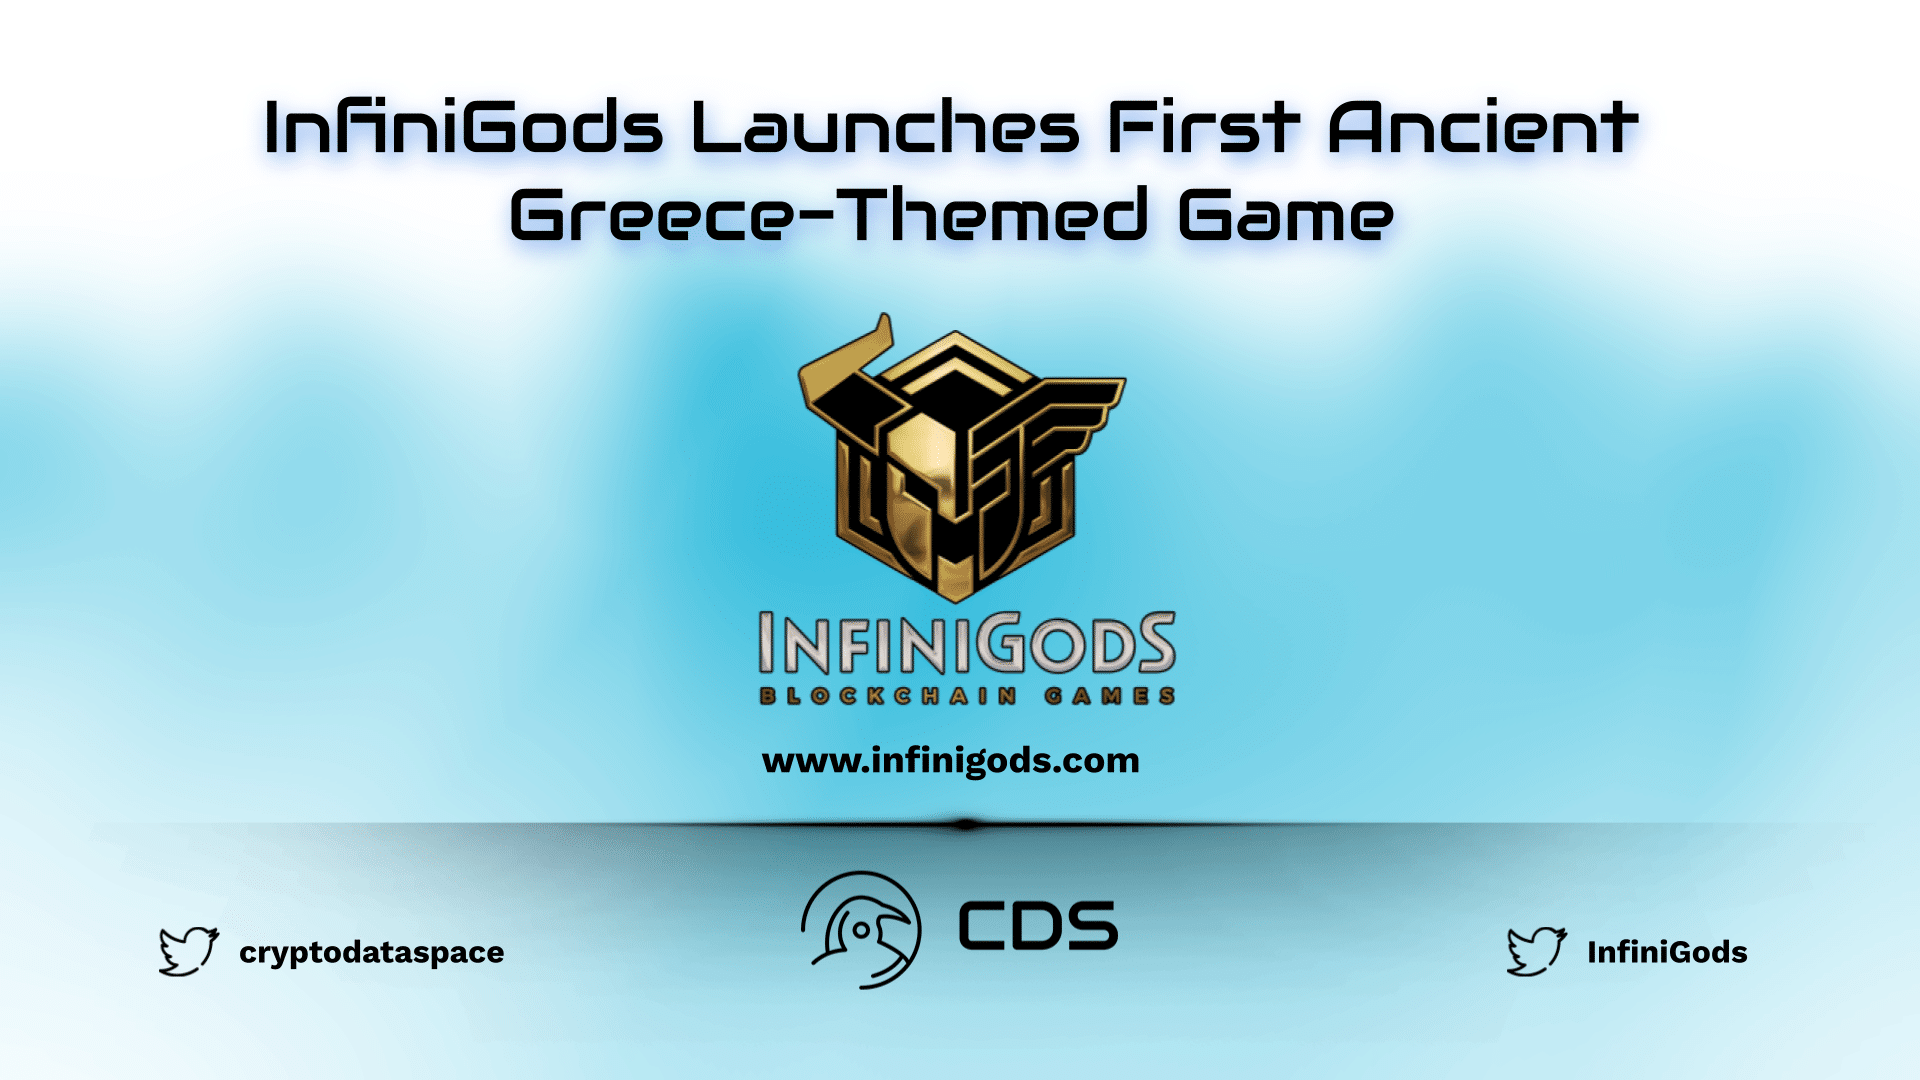 InfiniGods Launches First Ancient Greece-Themed Game